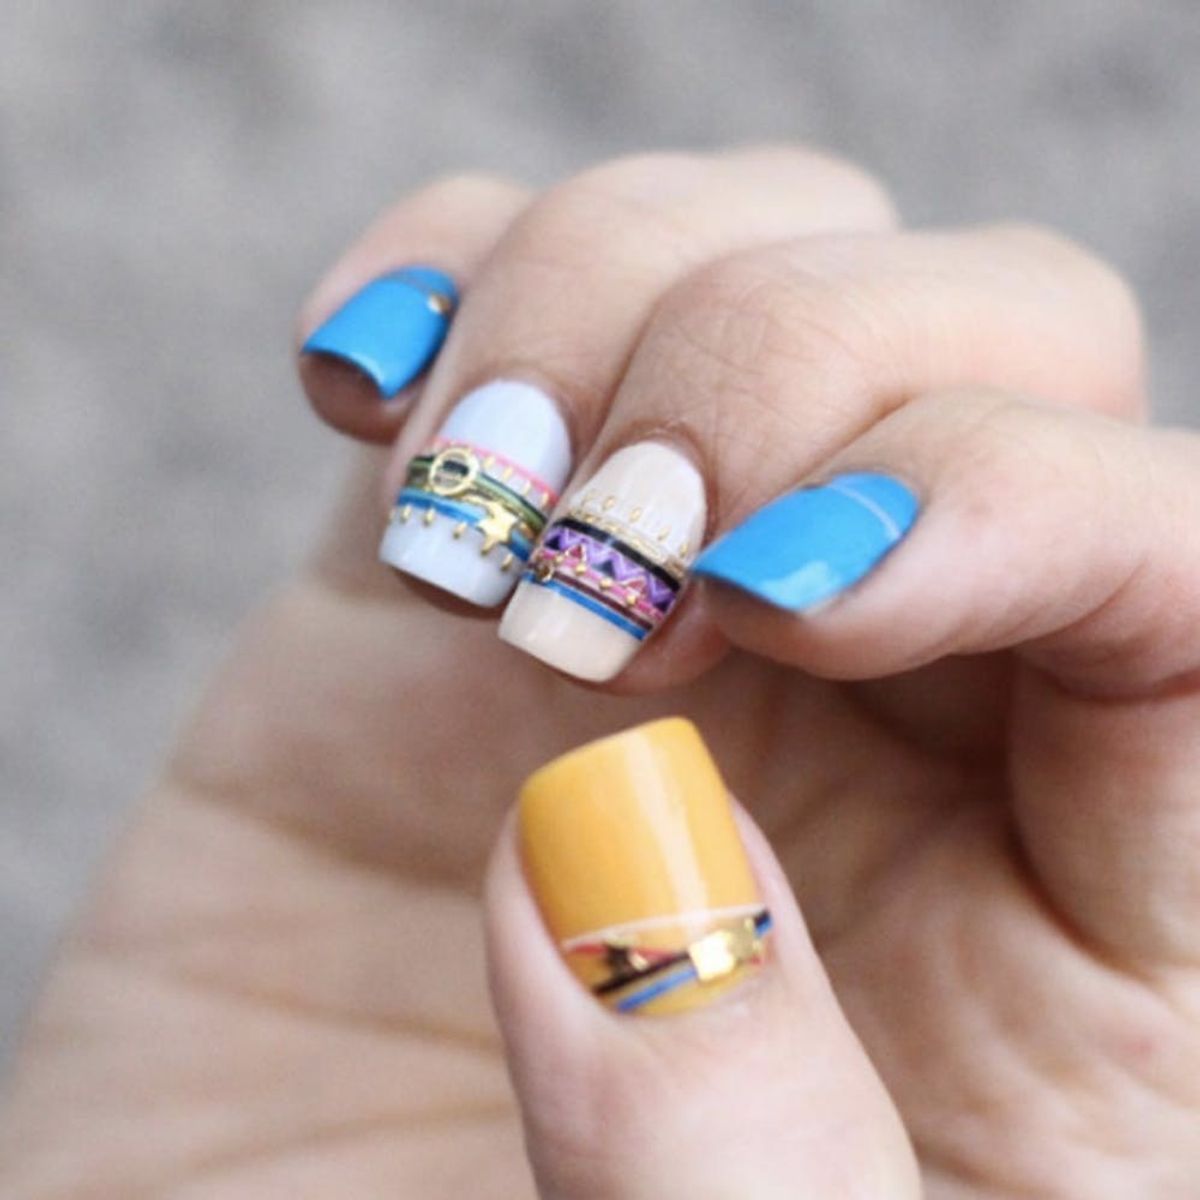 Bracelet Nails Are *the* Bling Your Summer Mani Needs